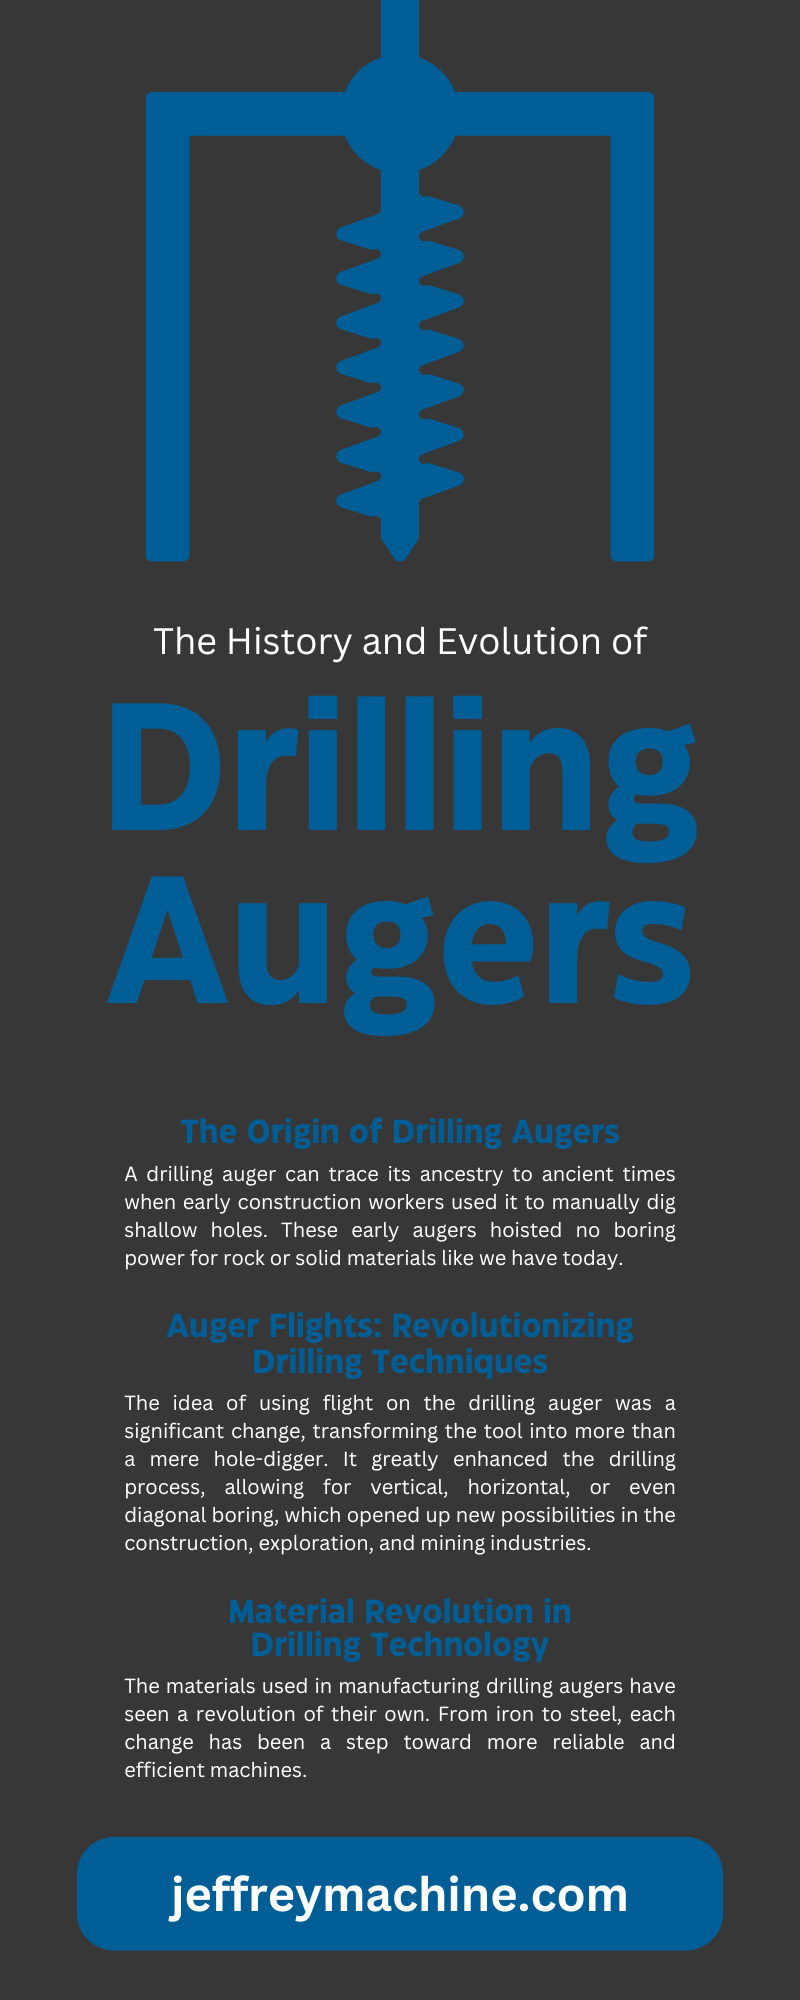 The History and Evolution of Drilling Augers